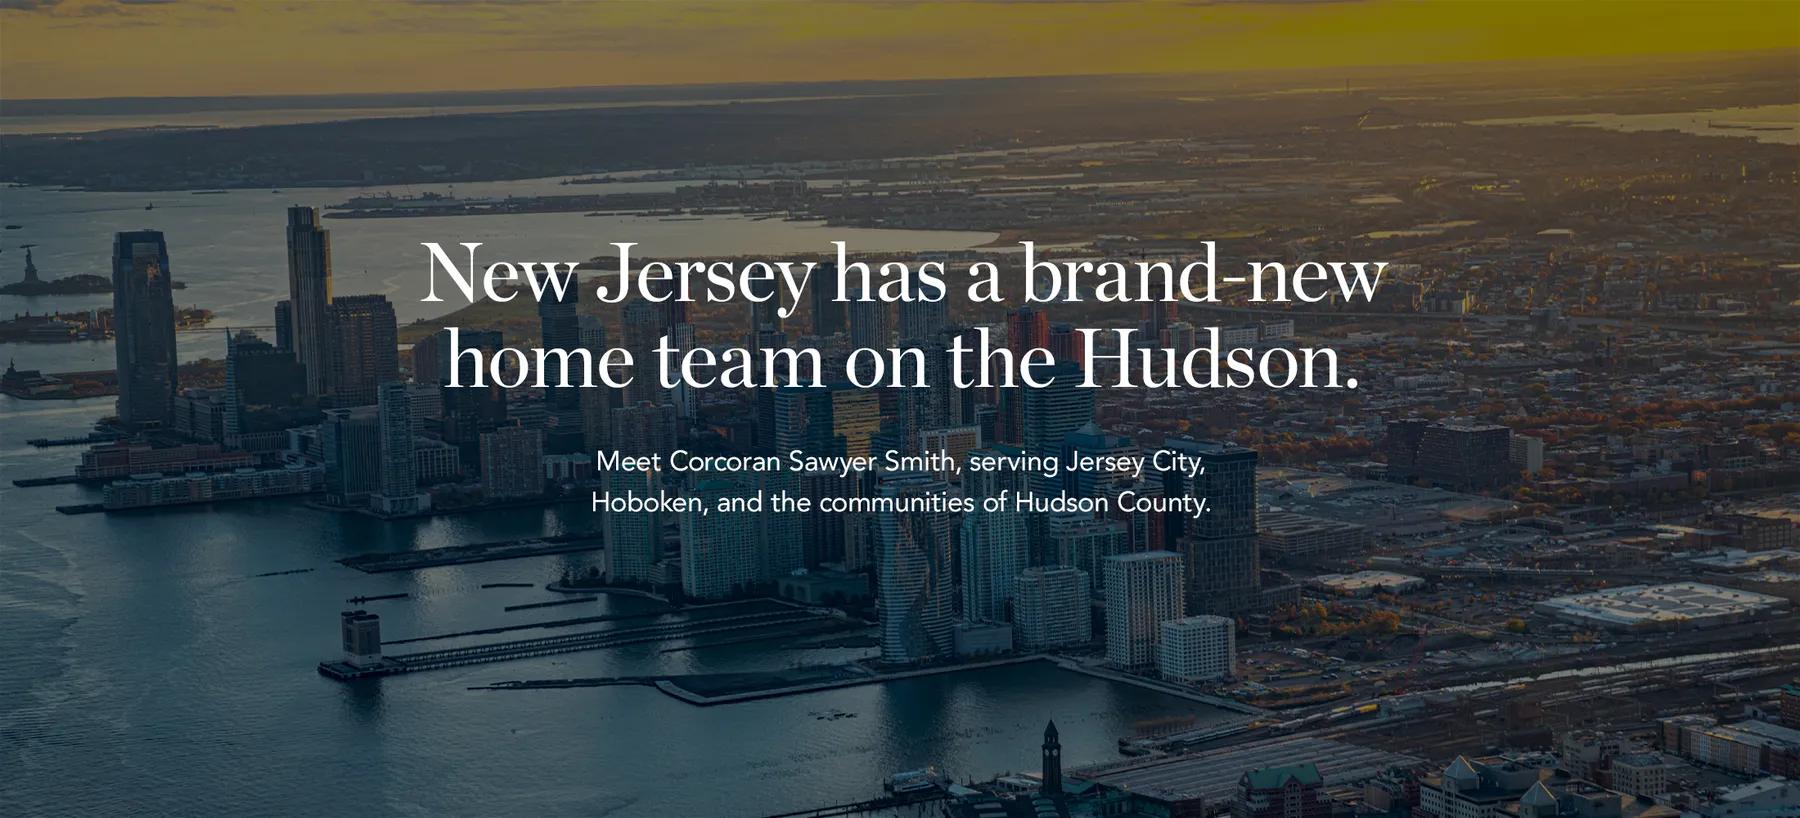 New Jersey has a brand-new home team on the Hudson. Meet Corcoran Sawyer Smith, serving Jersey City, Hoboken, and the communities of Hudson County.